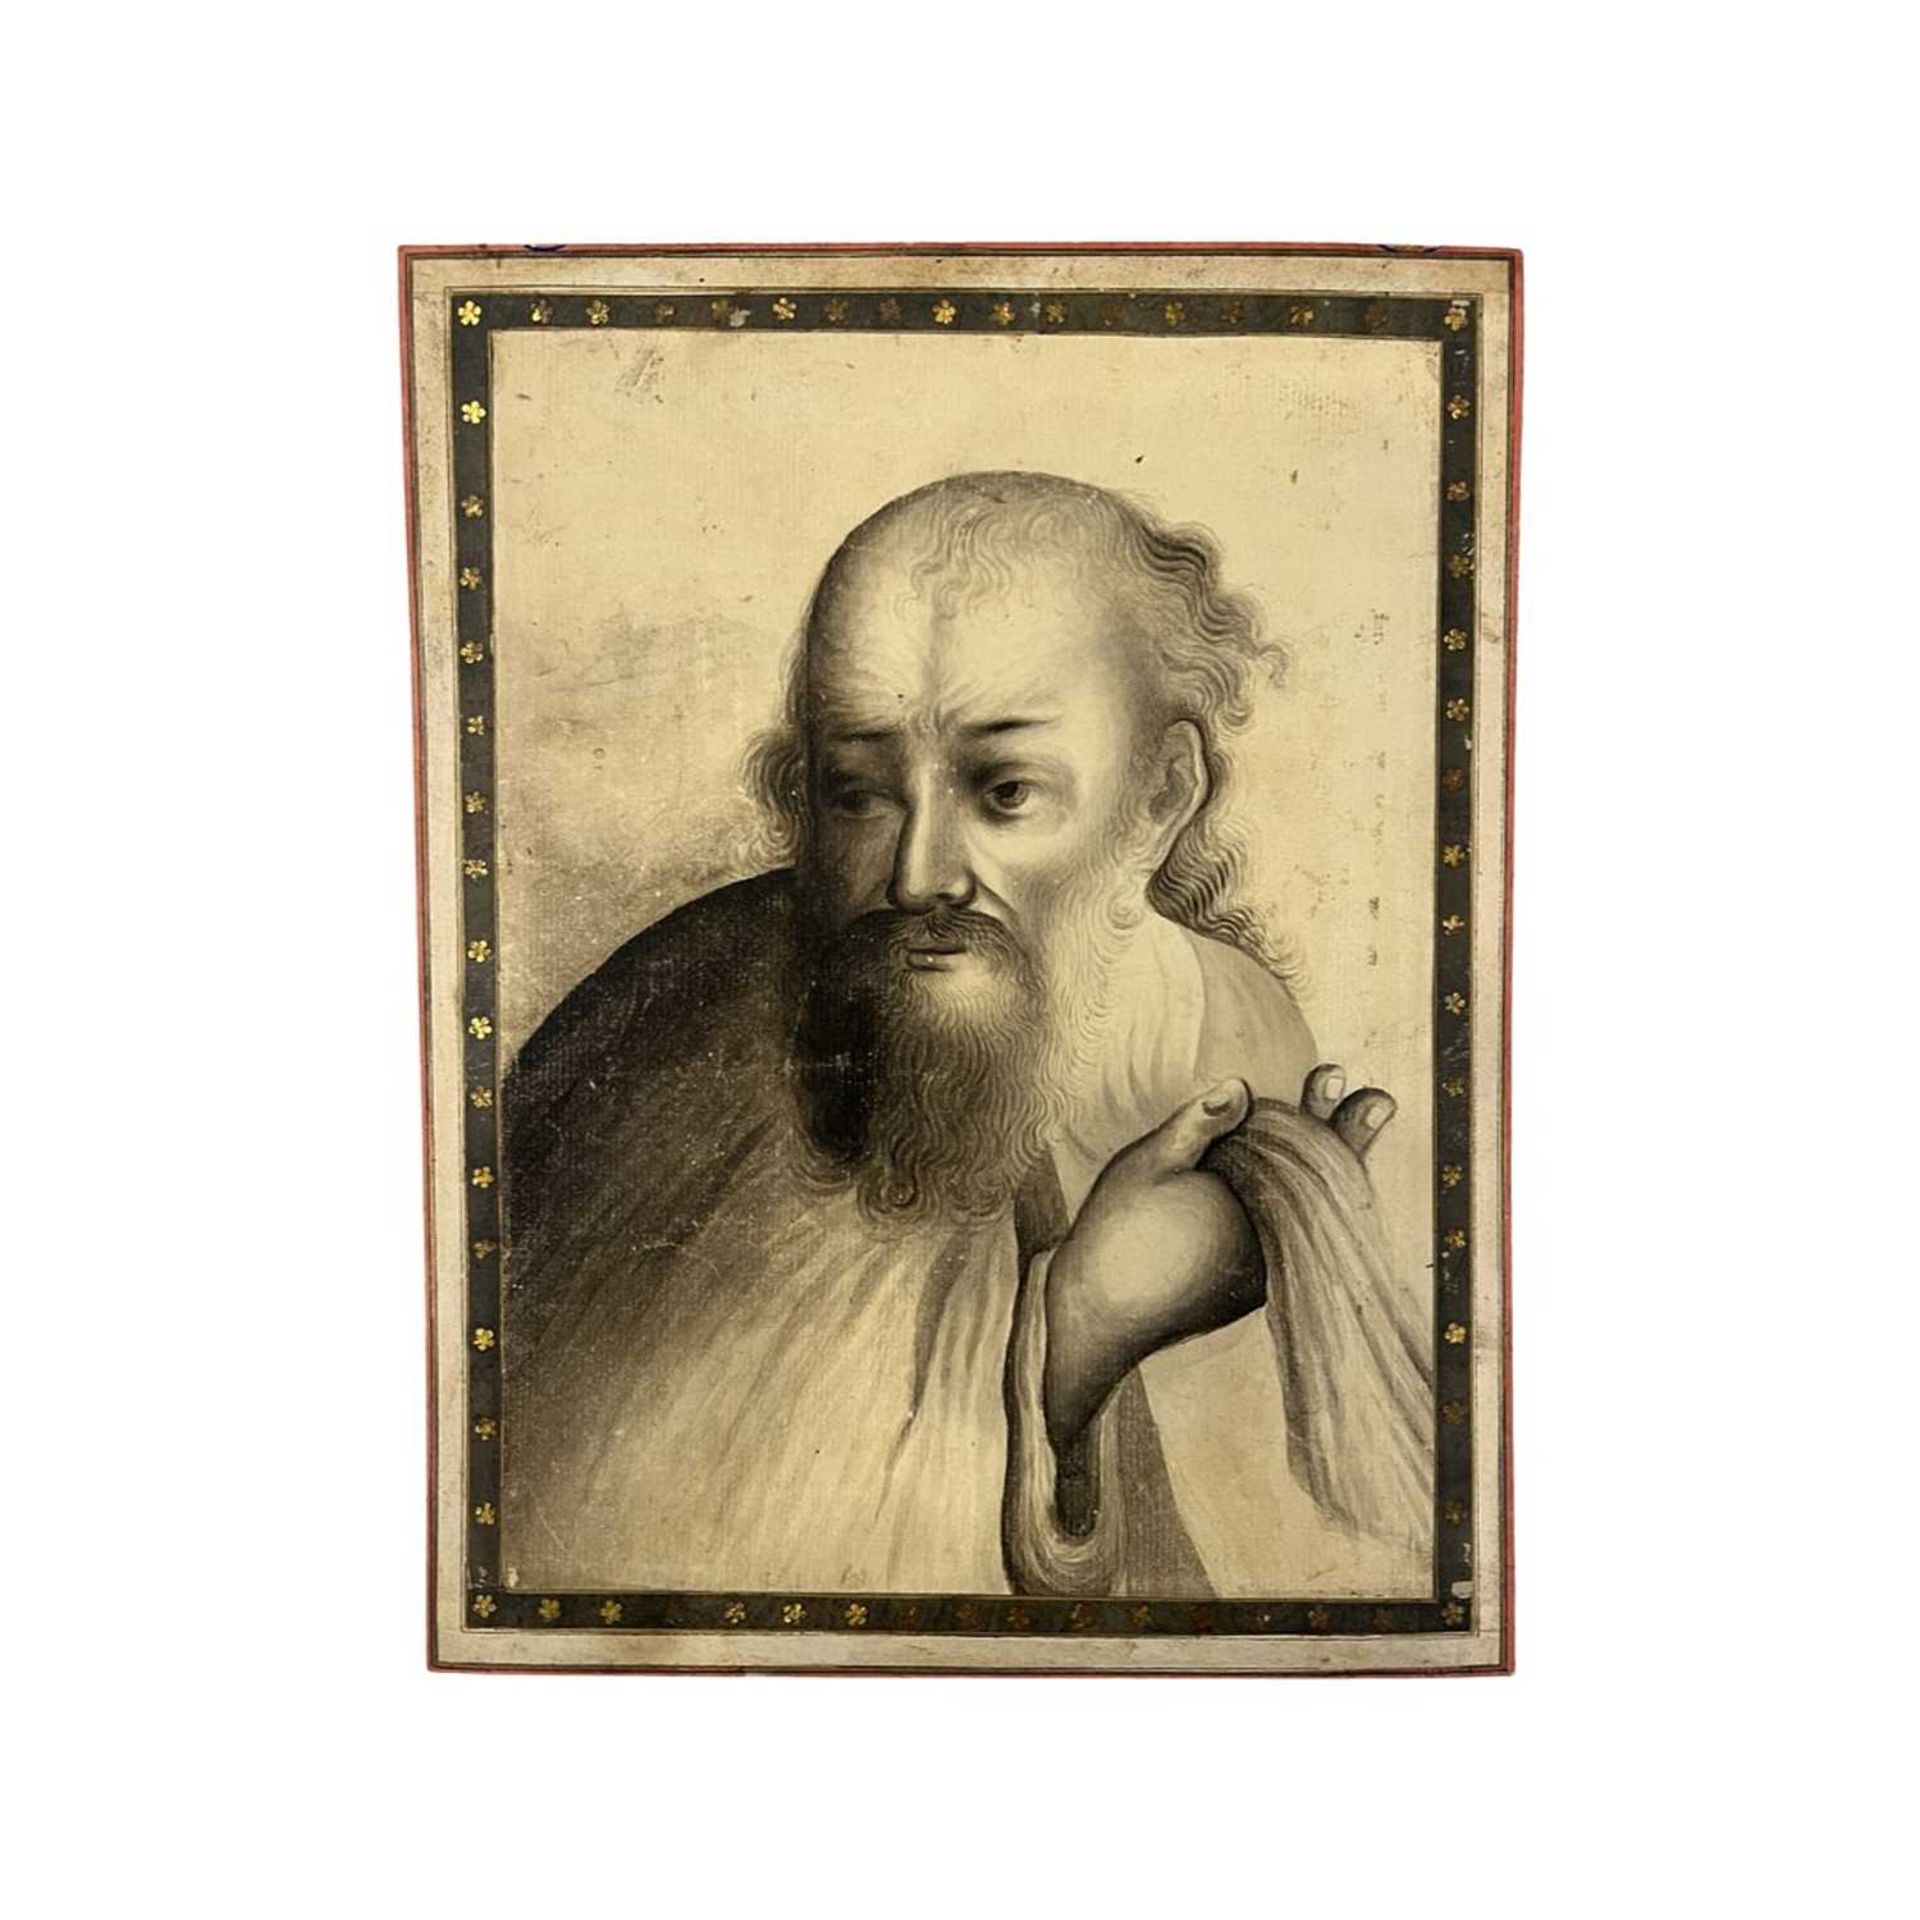 AN 18TH / 19TH CENTURY PERSIAN PEN AND INK DRAWING OF A BEARDED MAN, SAHEB ZAMAN